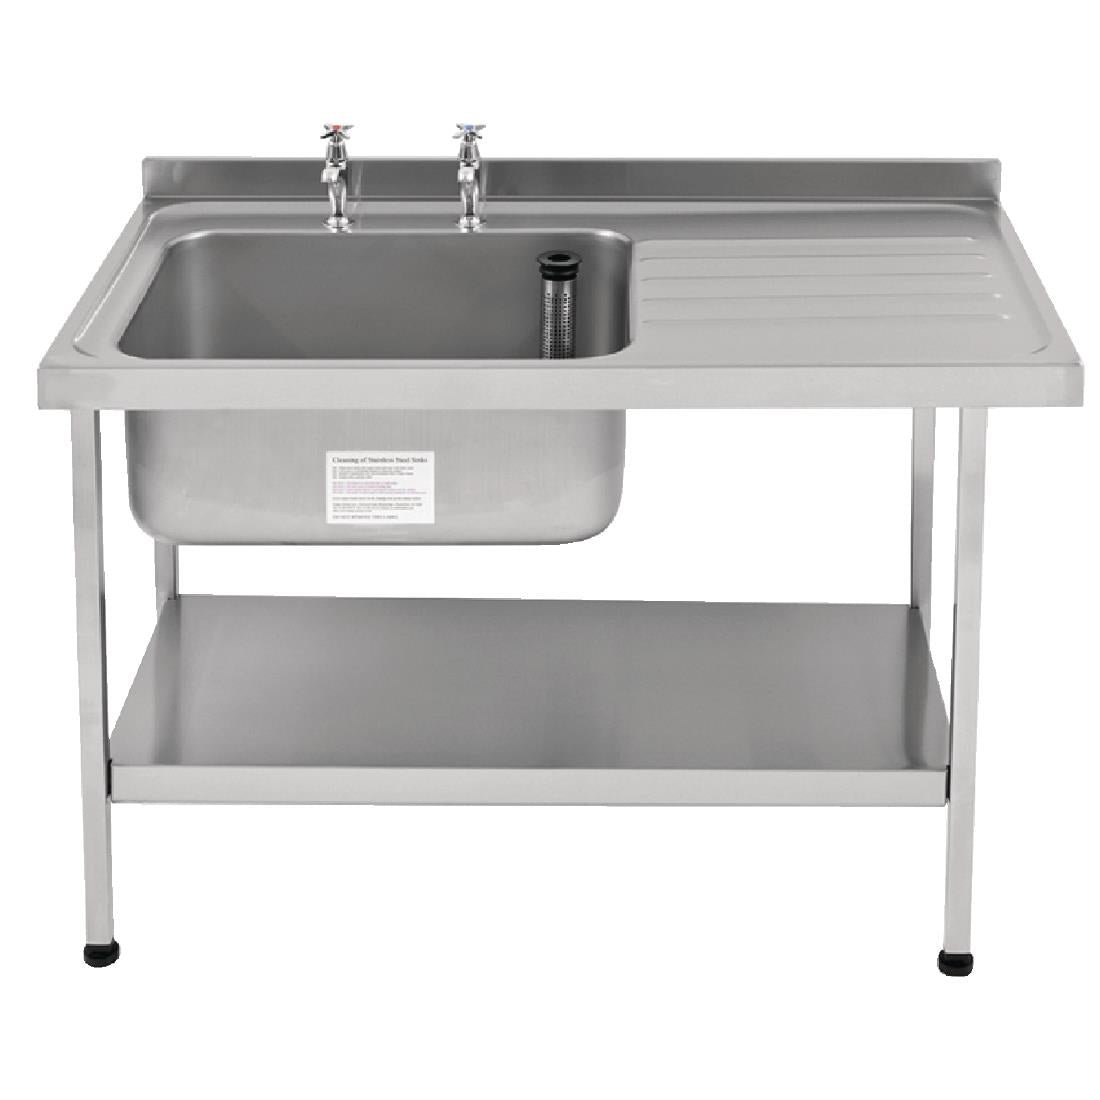 Franke Sissons Self Assembly Stainless Steel Sink Right Hand Drainer 1500x650mm JD Catering Equipment Solutions Ltd